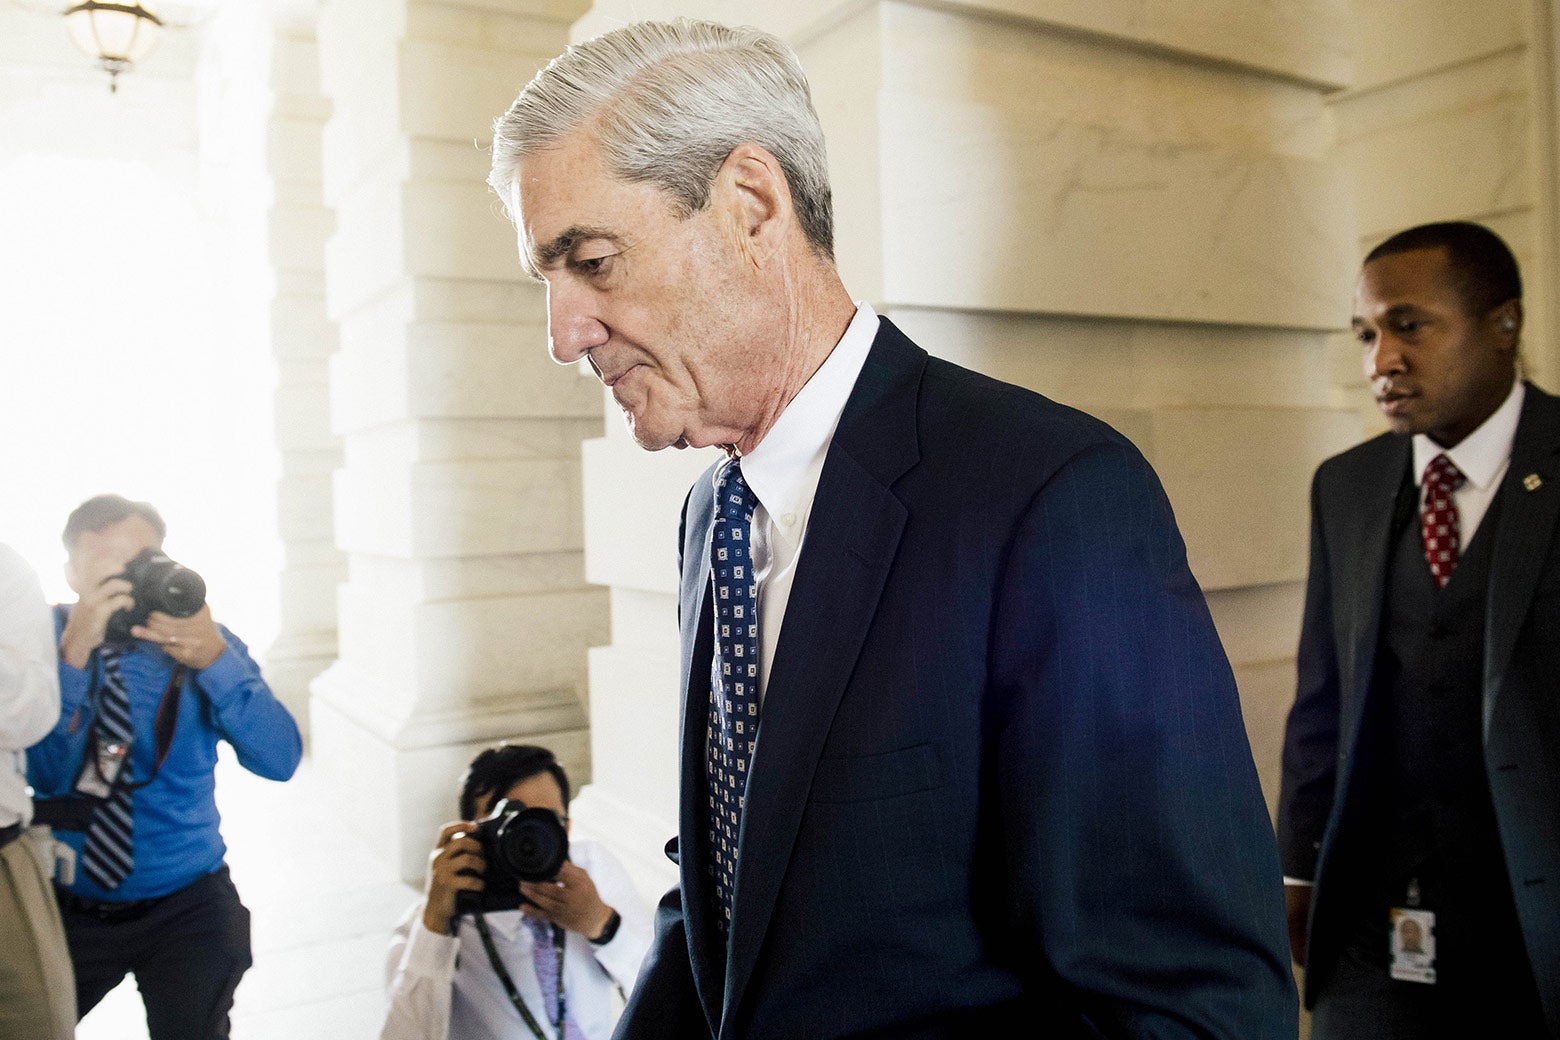 Special counsel Robert Mueller leaves following a meeting with members of the Senate Judiciary Committee in Washington on June 21.